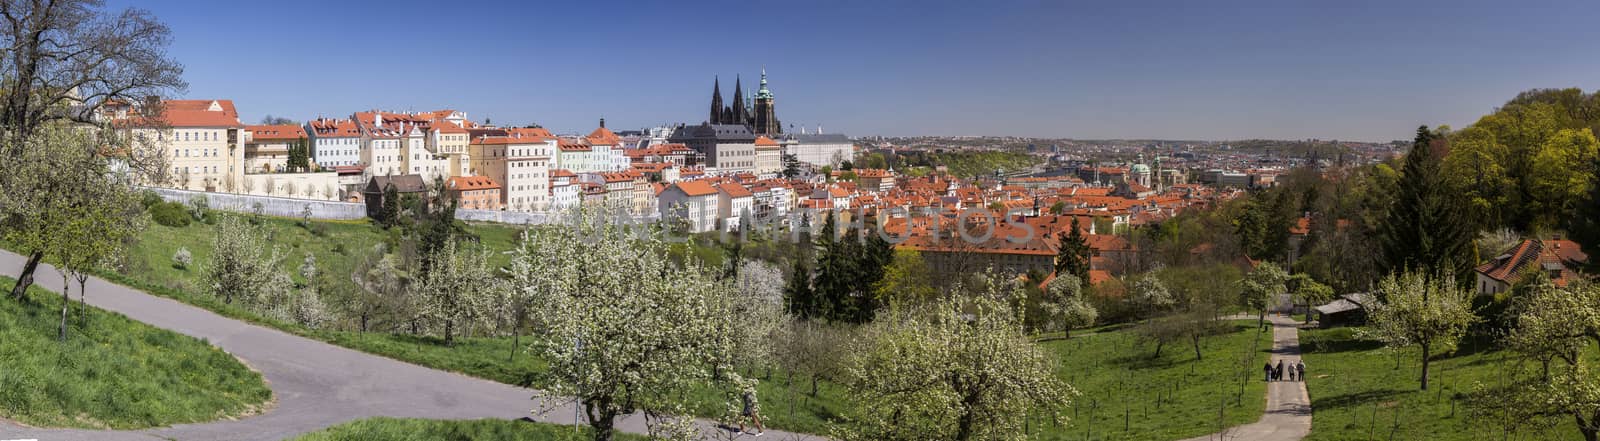 Panorama of Prague from Petrin hill